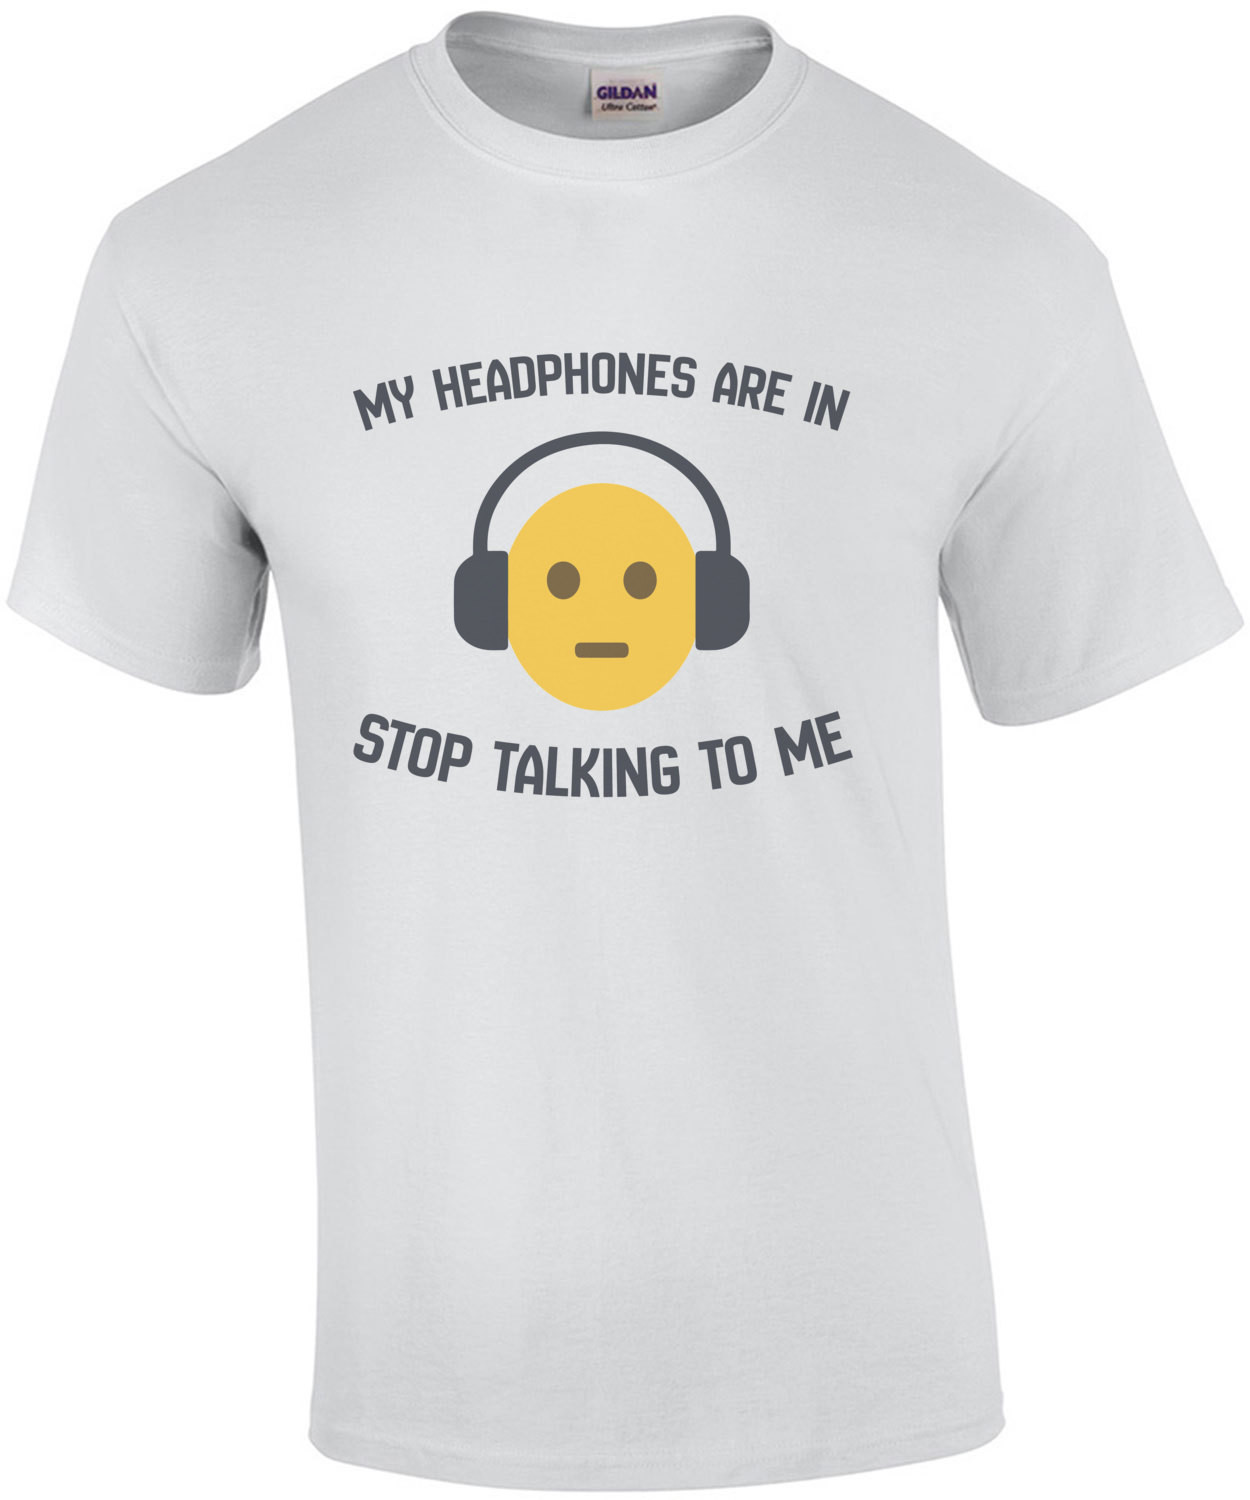 My headphones are in - stop talking to me.. Funny T-Shirt